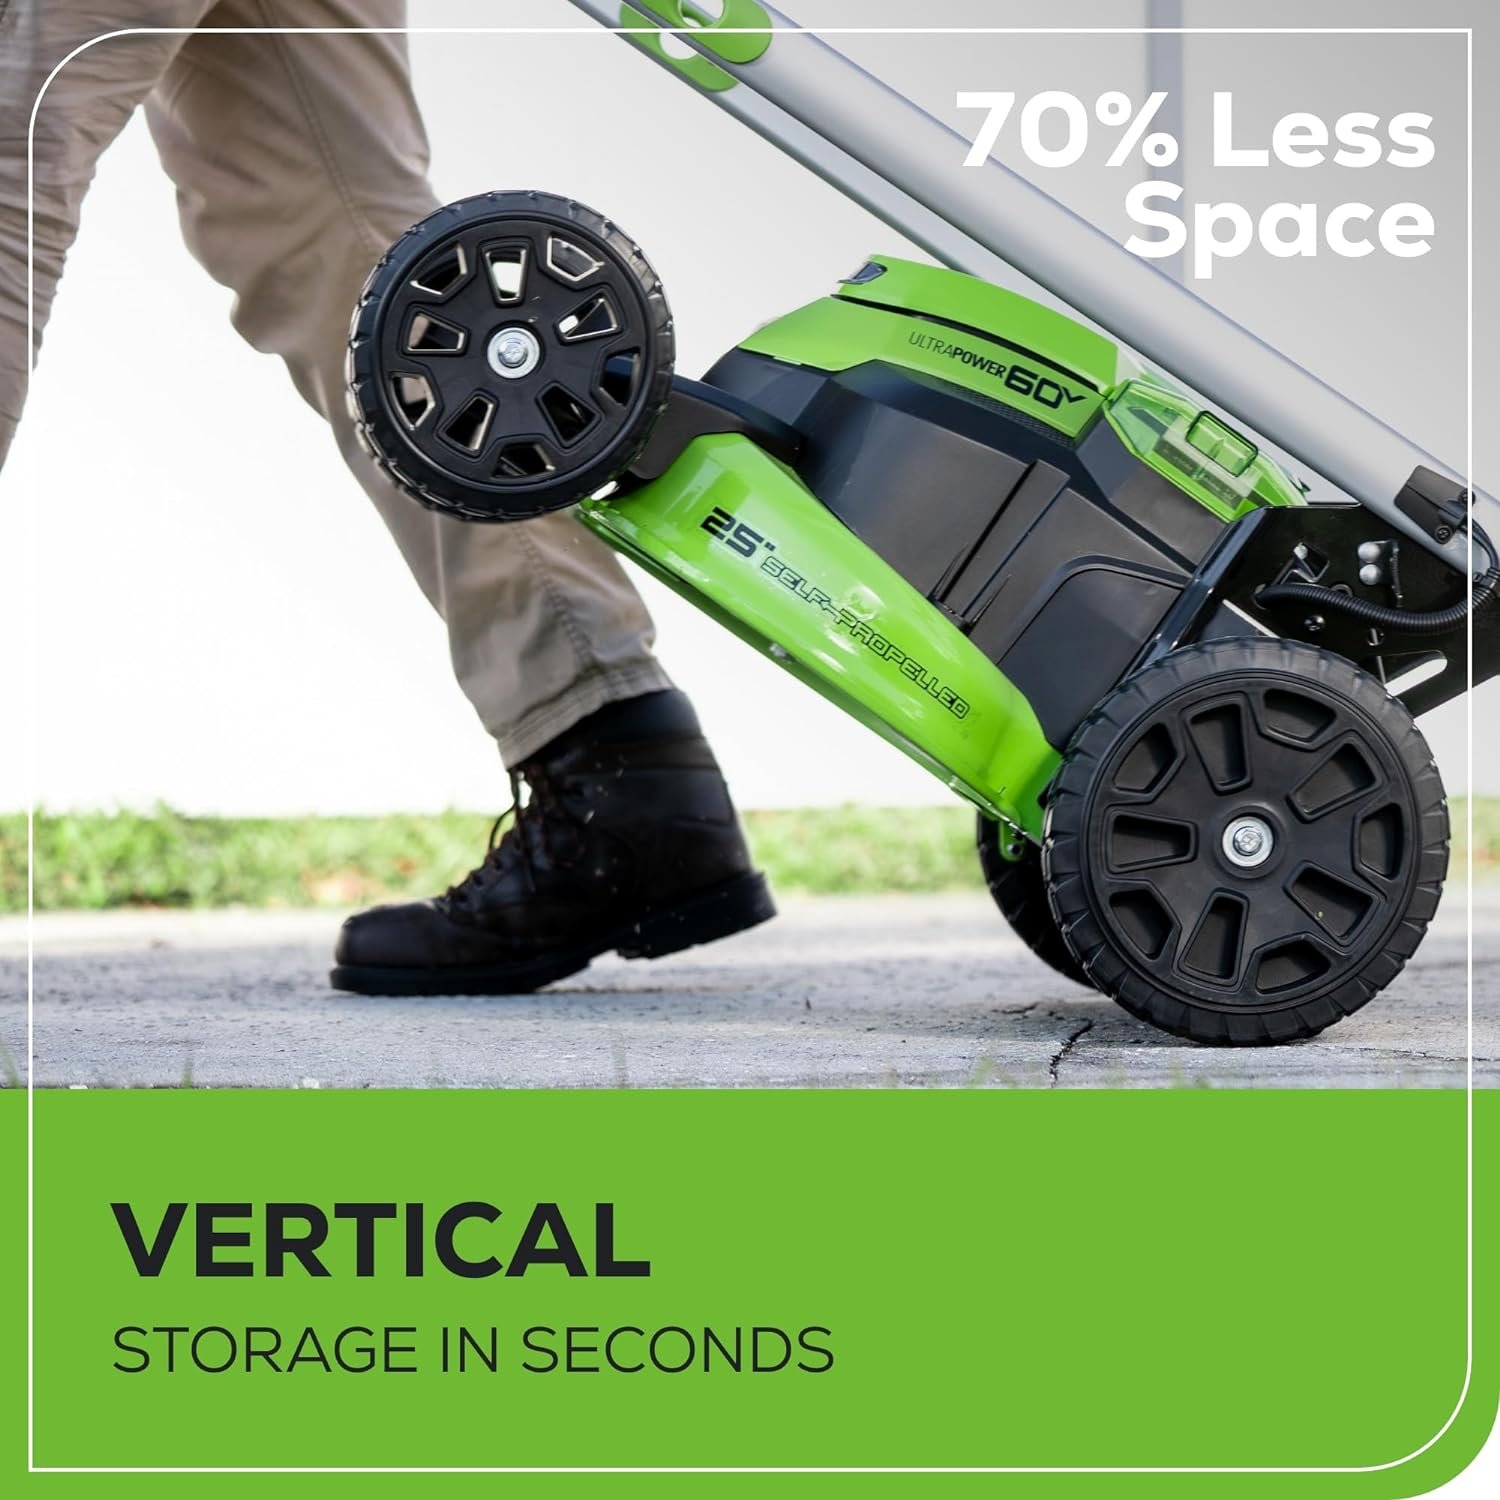 Greenworks 60V 21” Cordless Lawn Mower Review